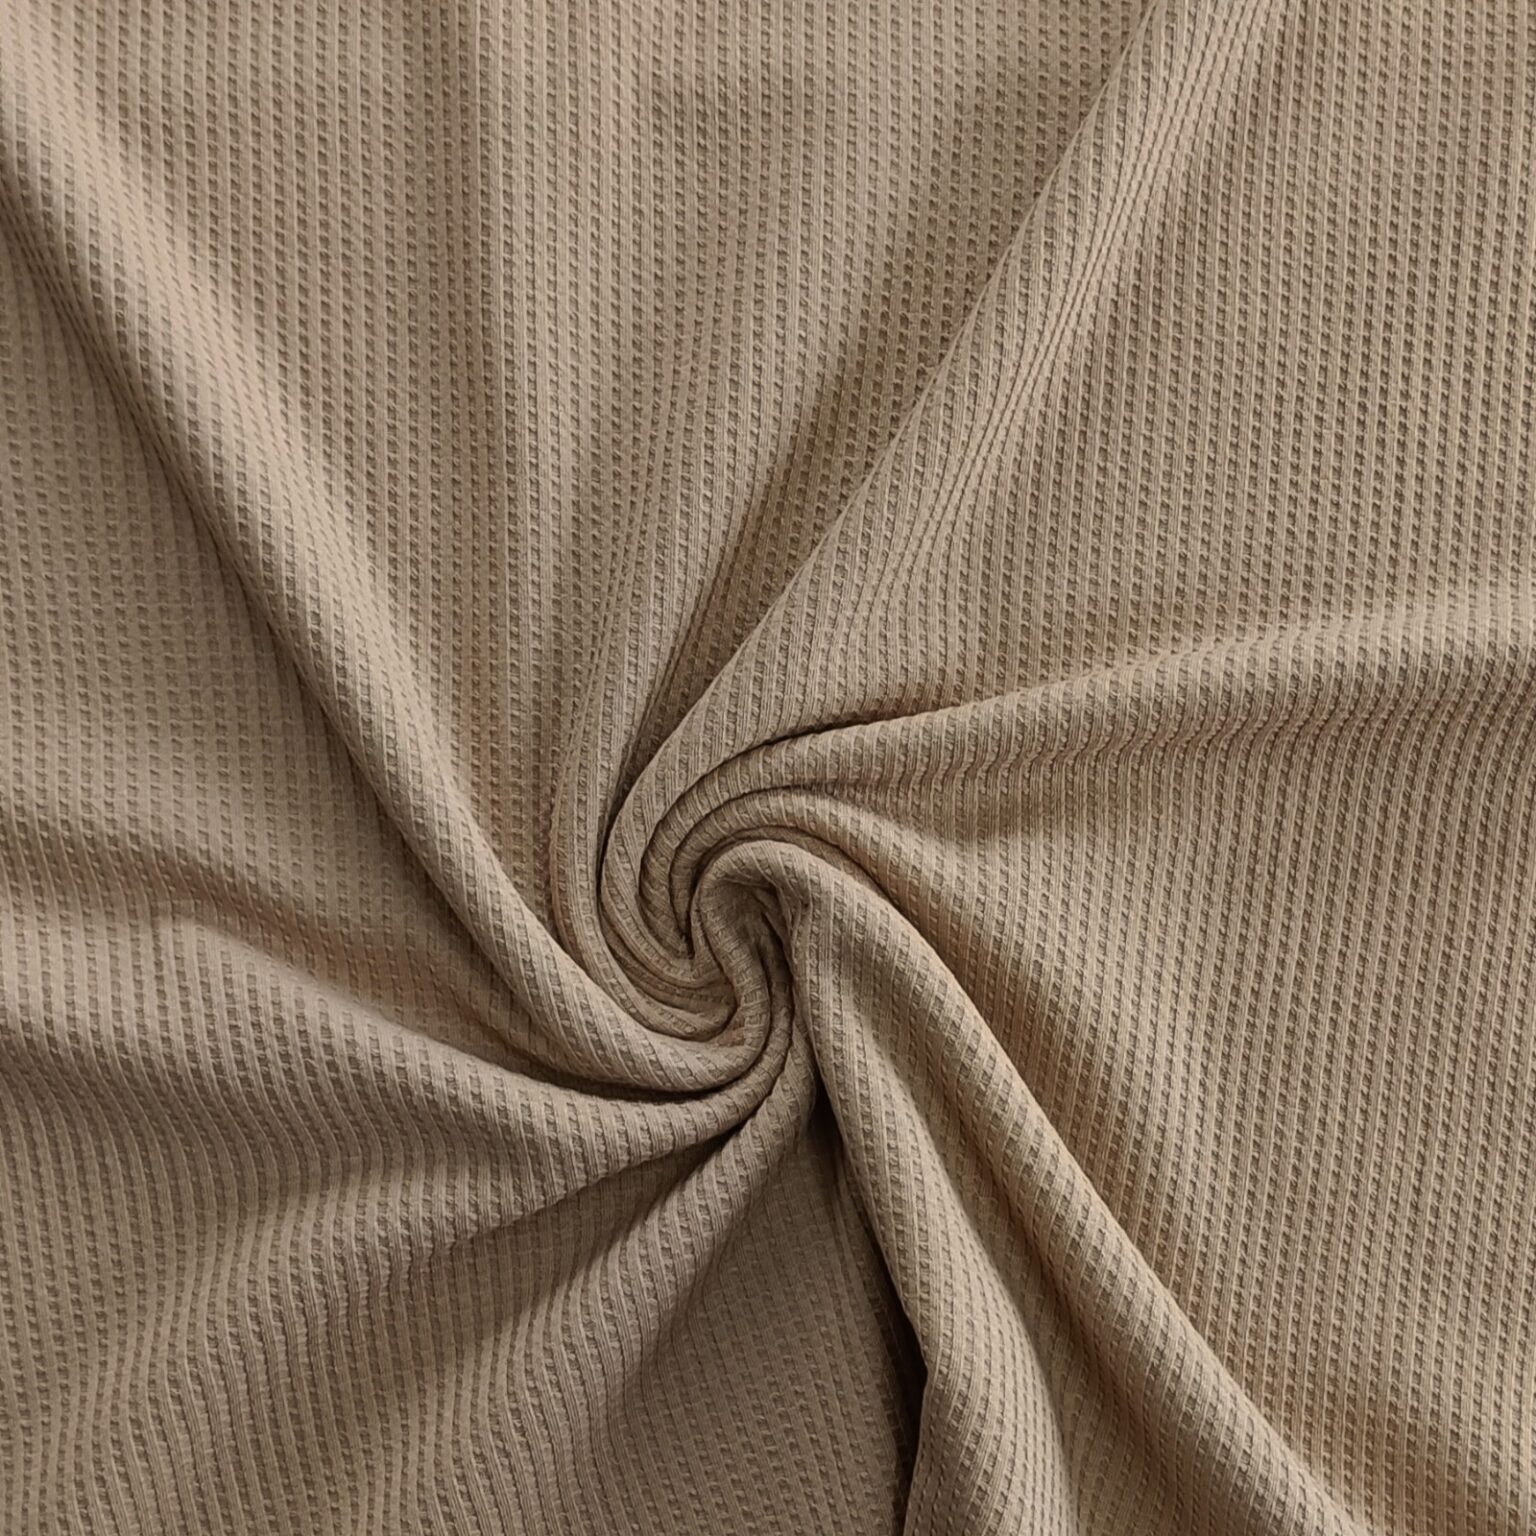 camel waffle cotton jersey fabric | More Sewing